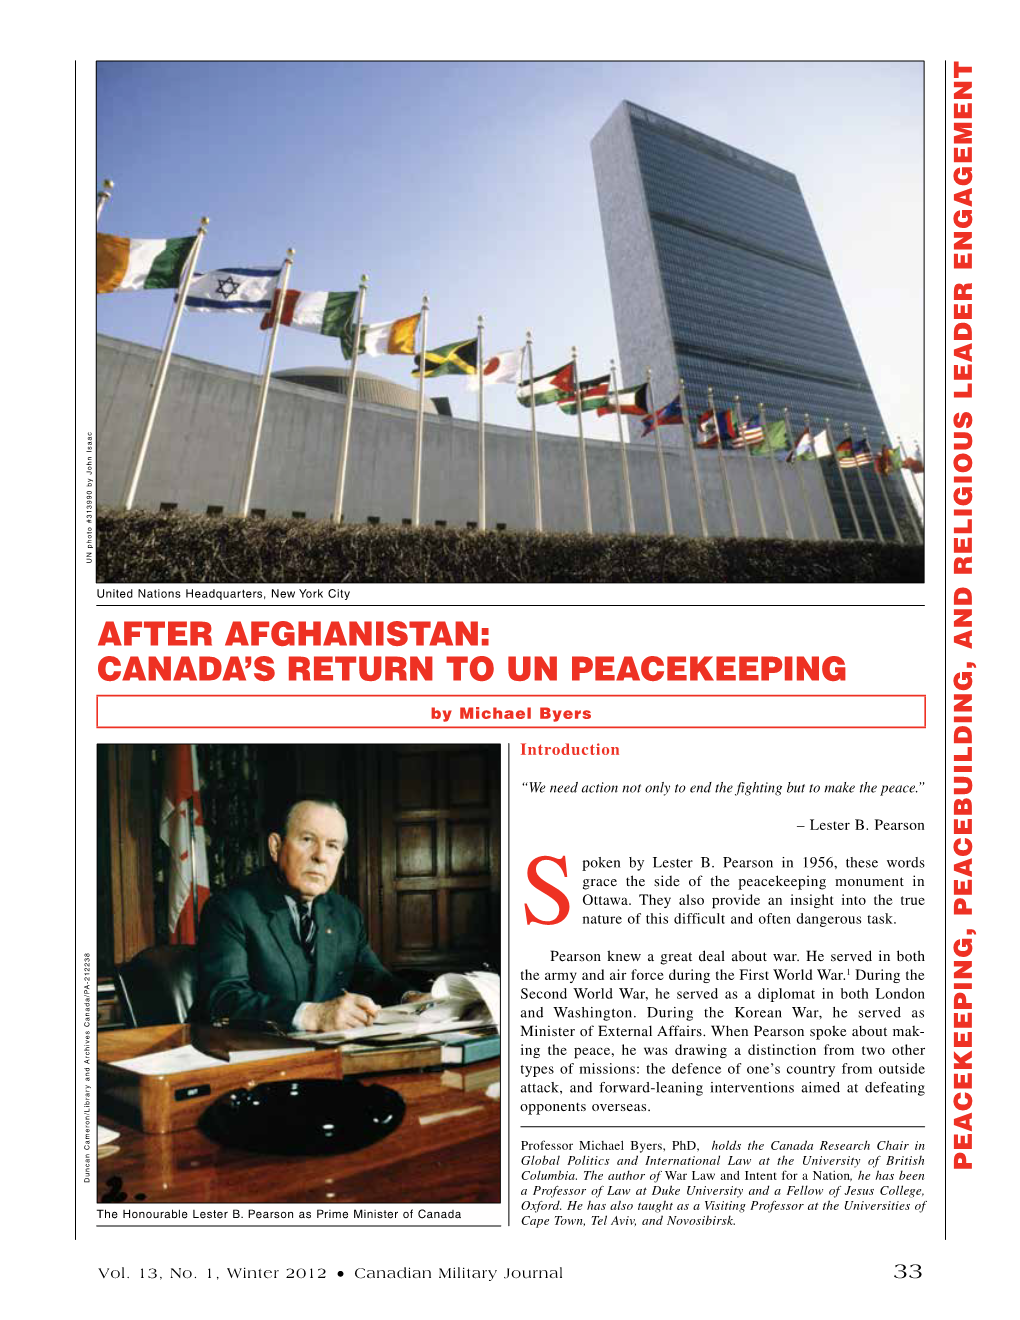 After Afghanistan: Canada’S Return to UN Peacekeeping